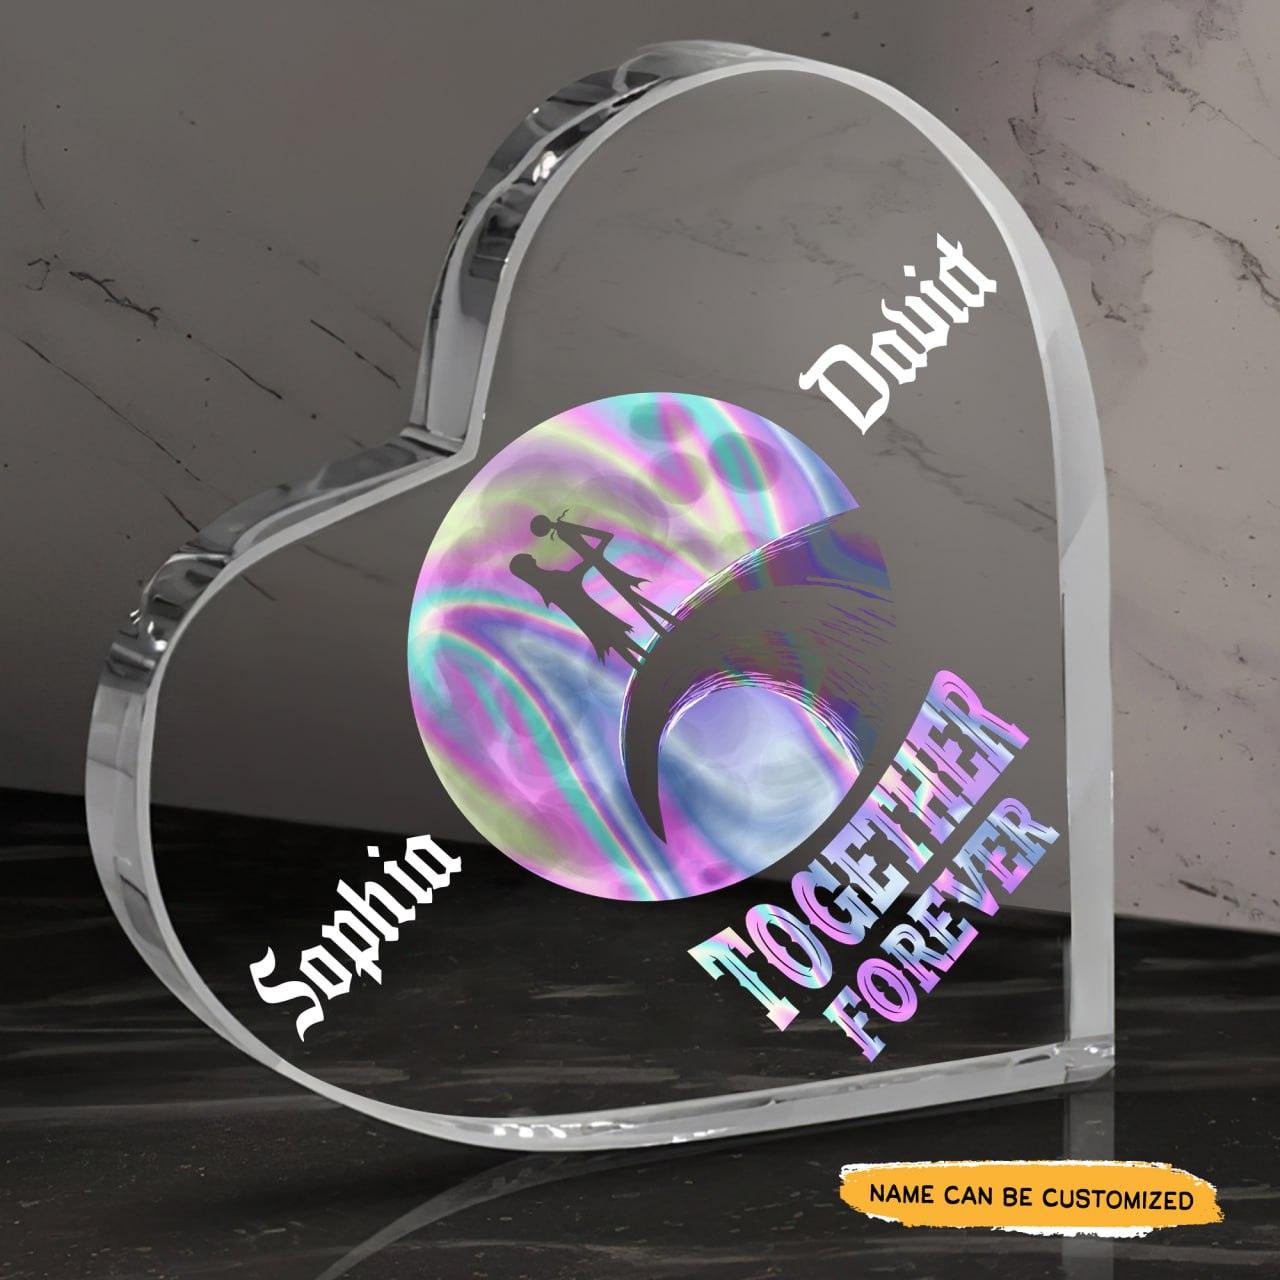 Together Forever - Customized Skull Couple Crystal Heart Anniversary Gifts - Wonder Skull